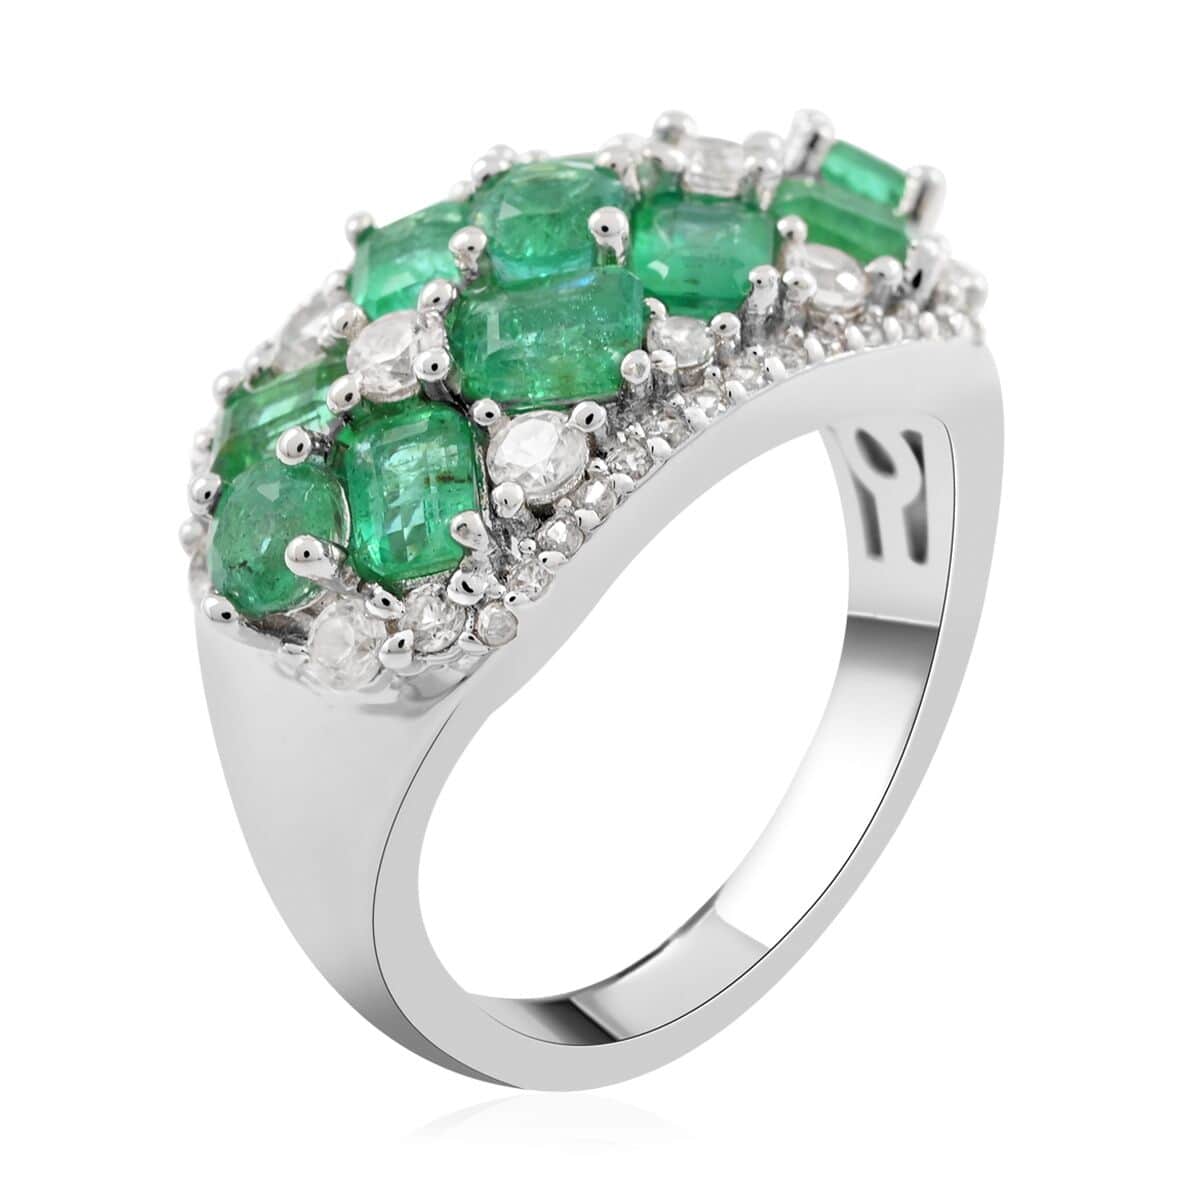 Buy AAA Kagem Emerald and White Zircon Ring in Rhodium Over Sterling ...